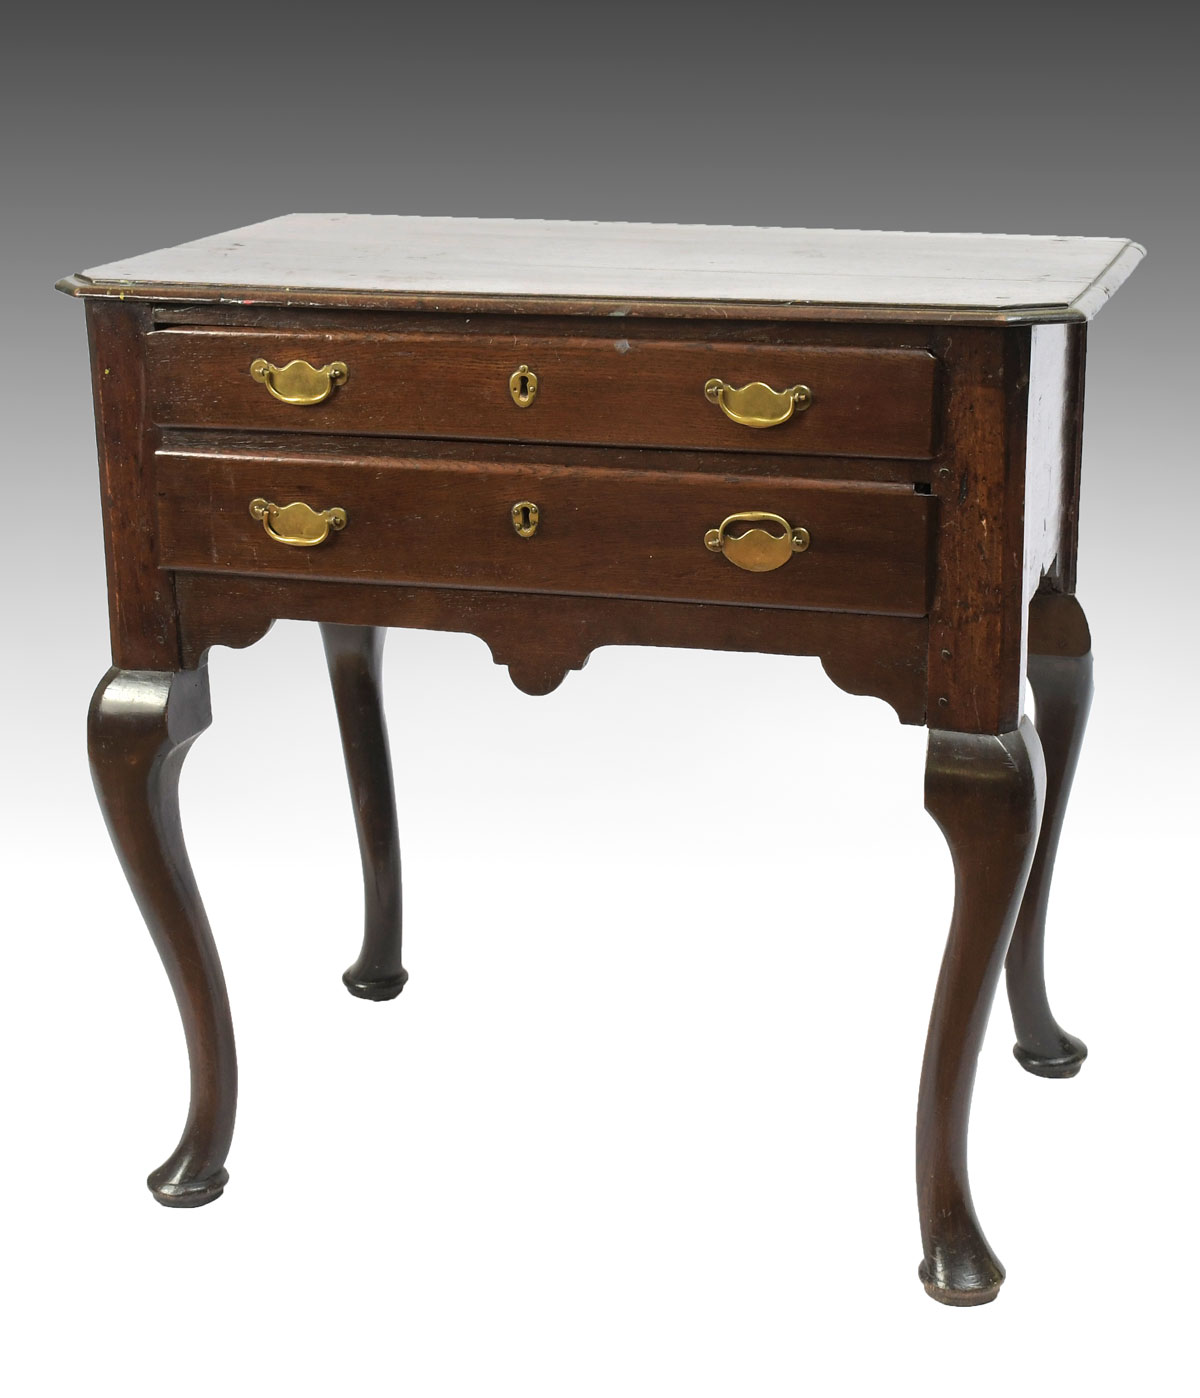 EARLY QUEEN ANNE LOW BOY: 2- Drawer